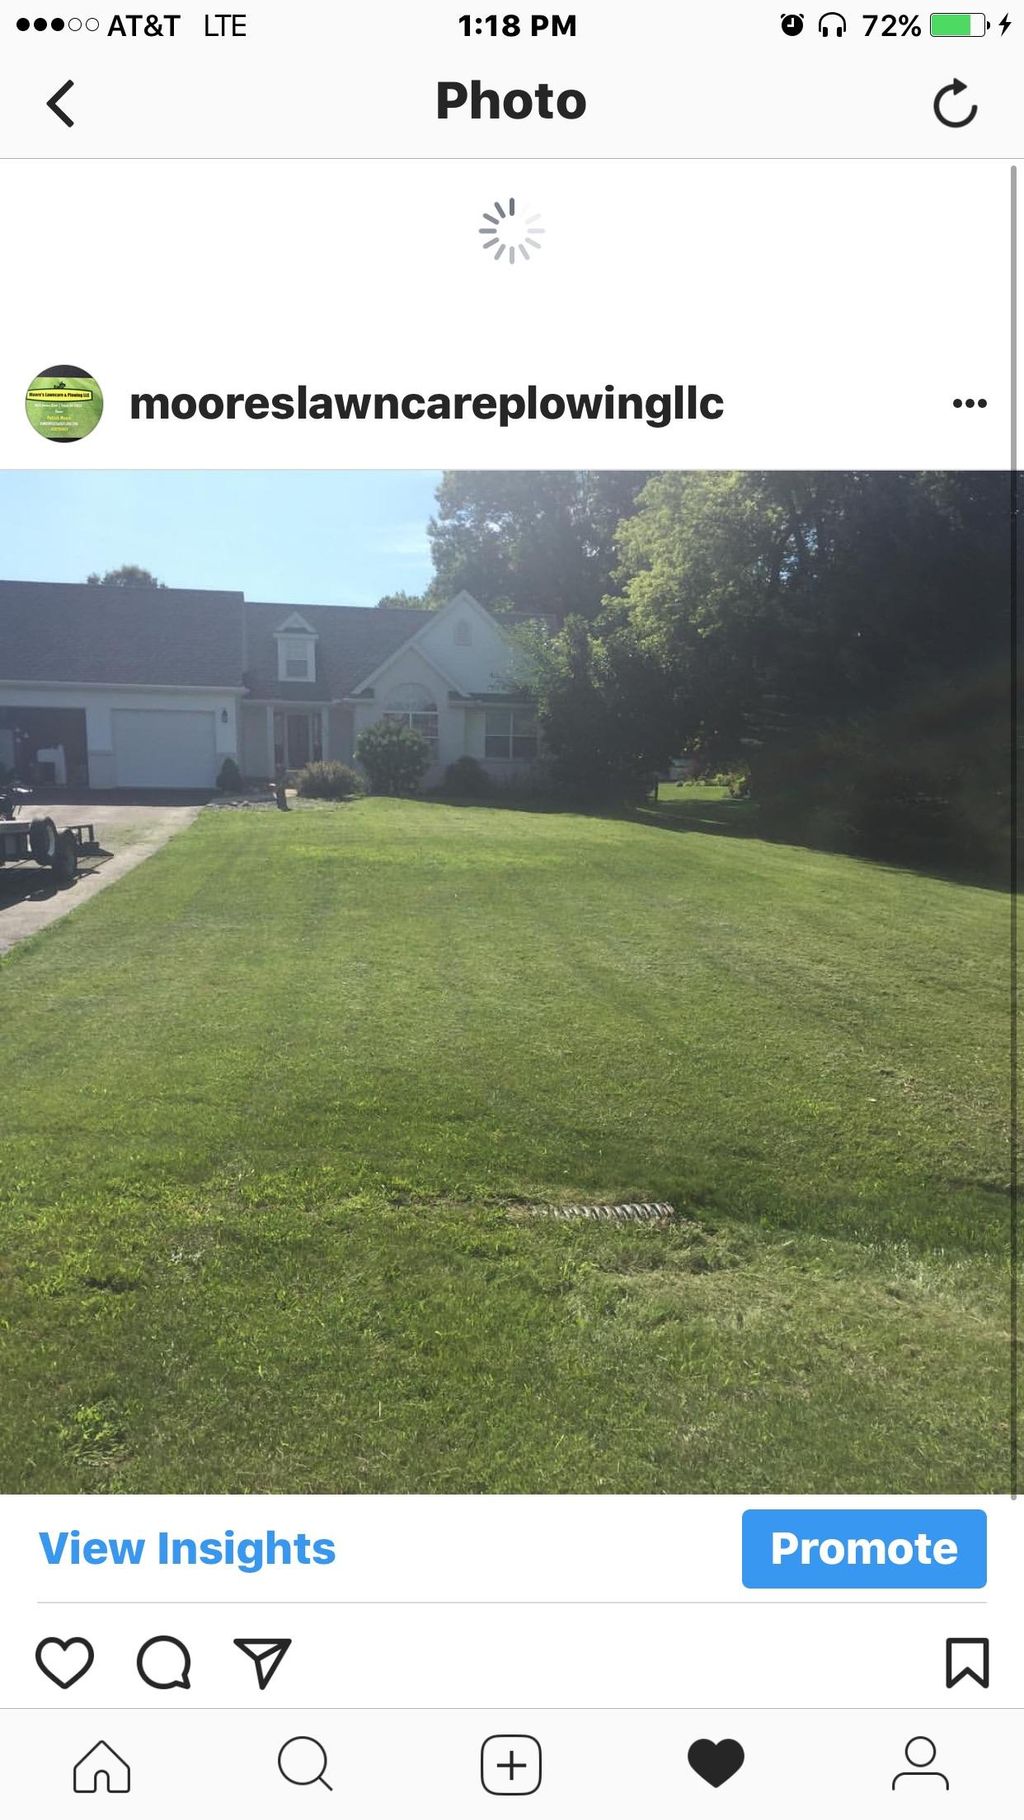 Moores lawn Care & Plowing LLC